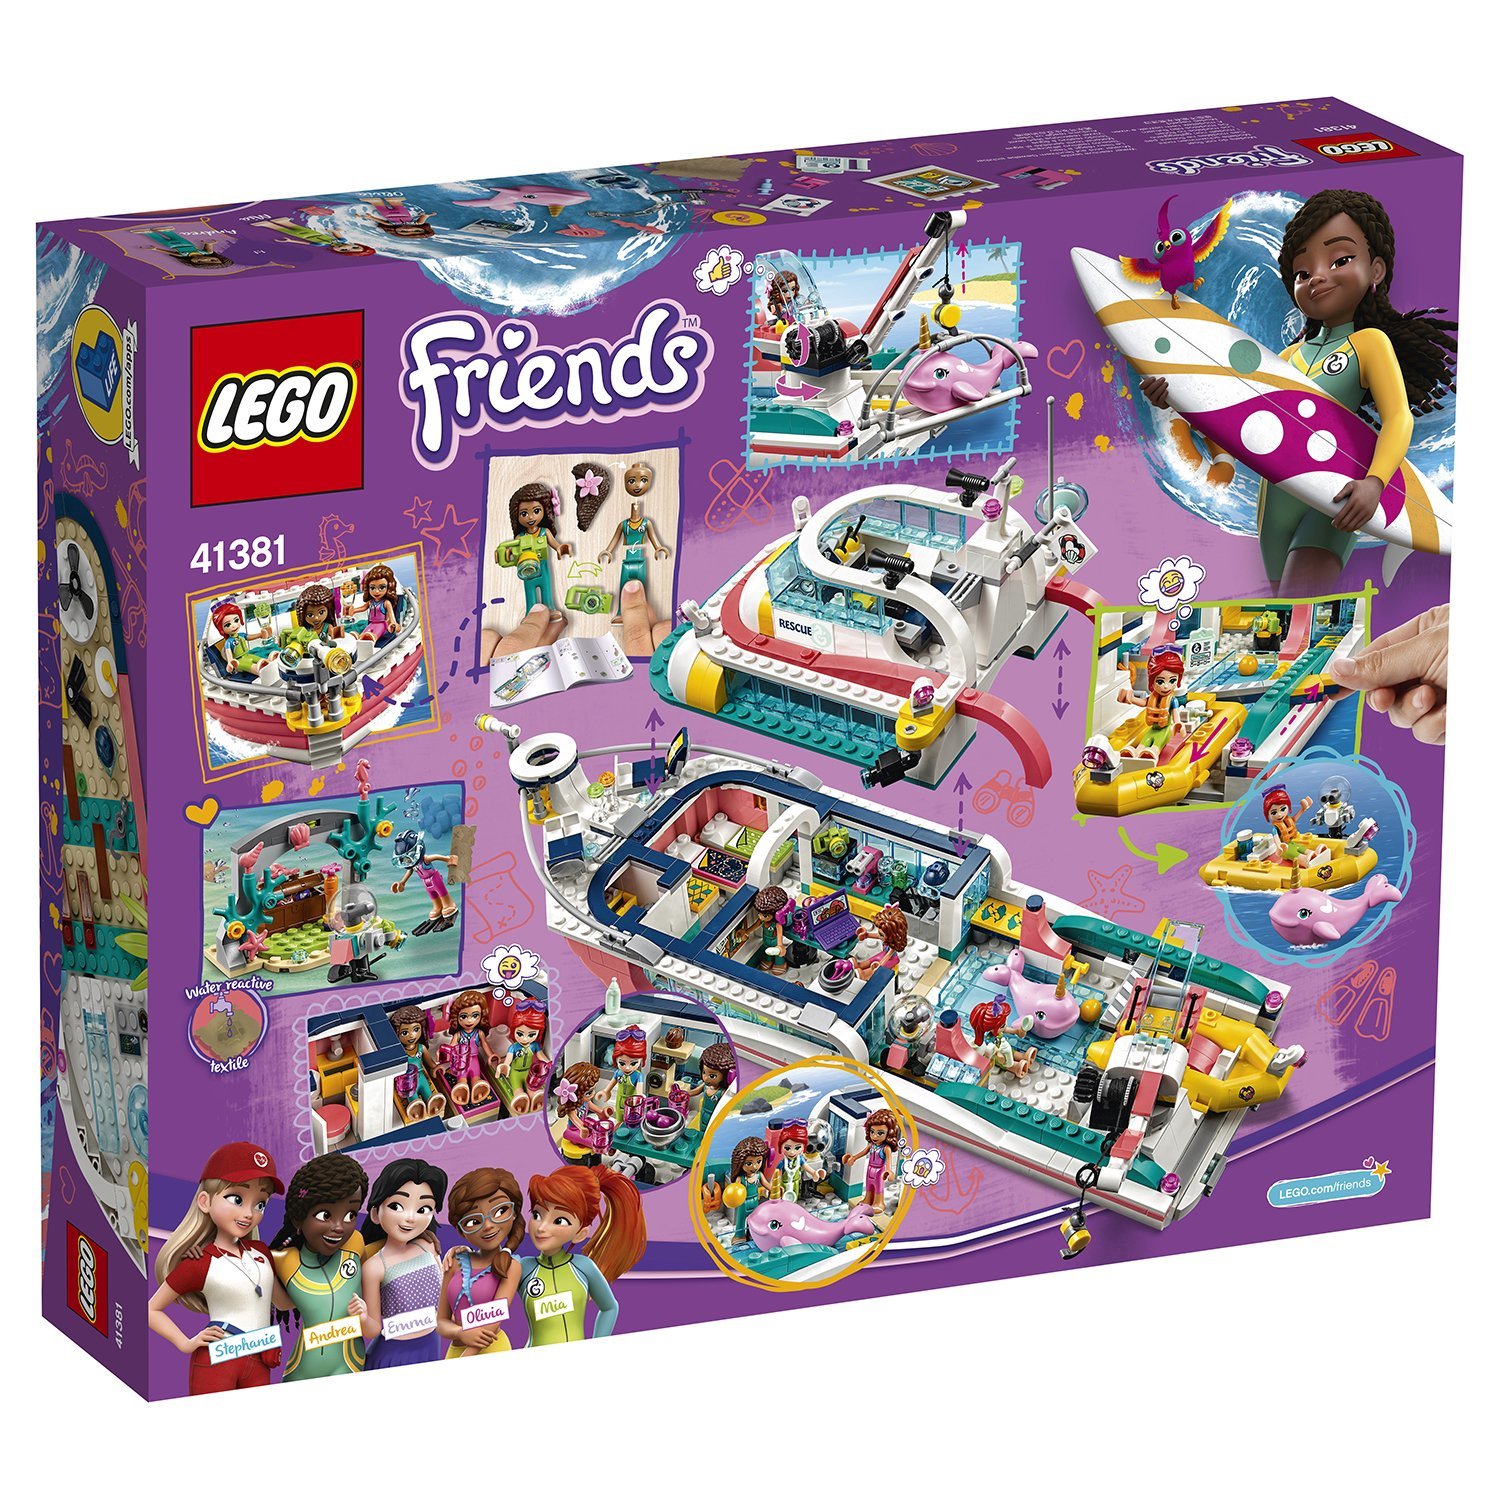 lego friends rescue mission boat 41381